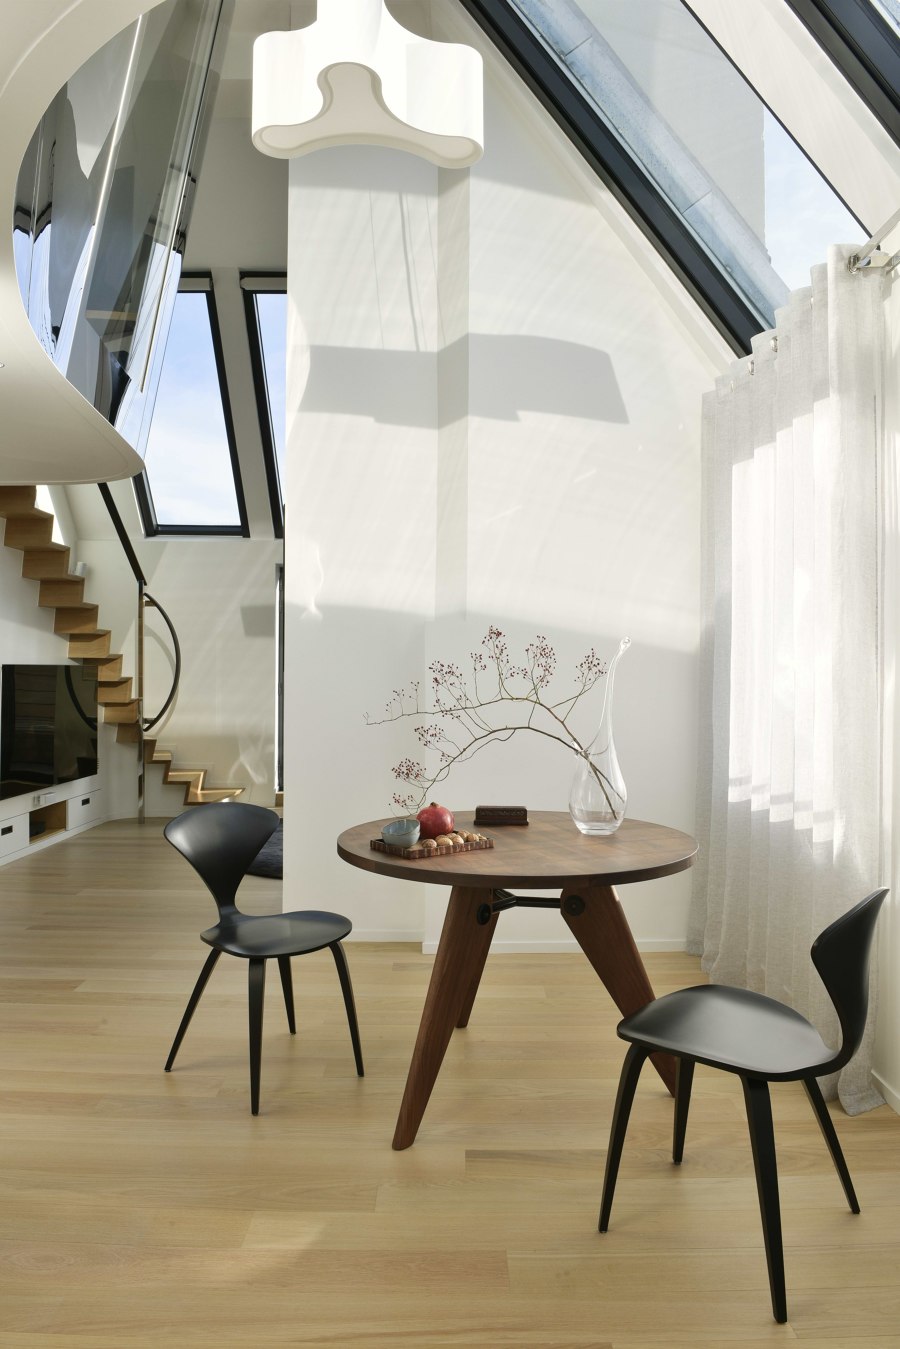 VILLA ROOF by Maxime d'Angeac | Living space